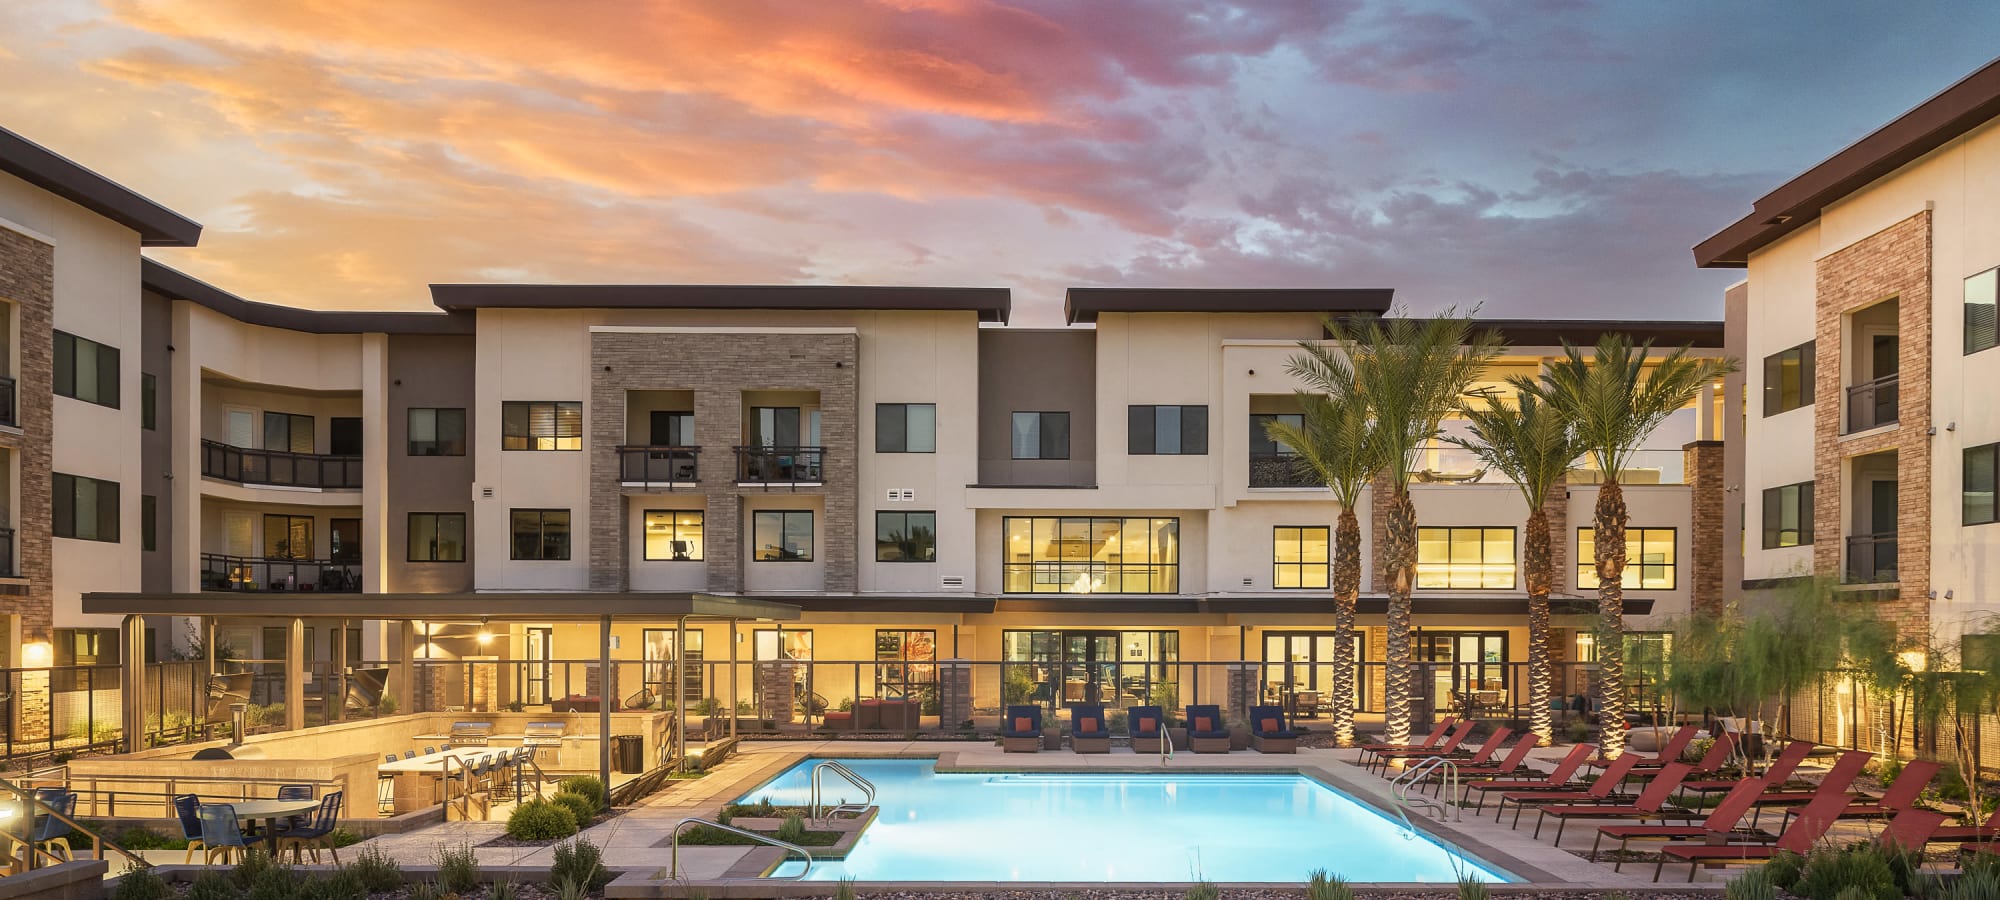 Swimming pool  overlooking the whole apartment at Soltra at San Tan Village in Gilbert, Arizona